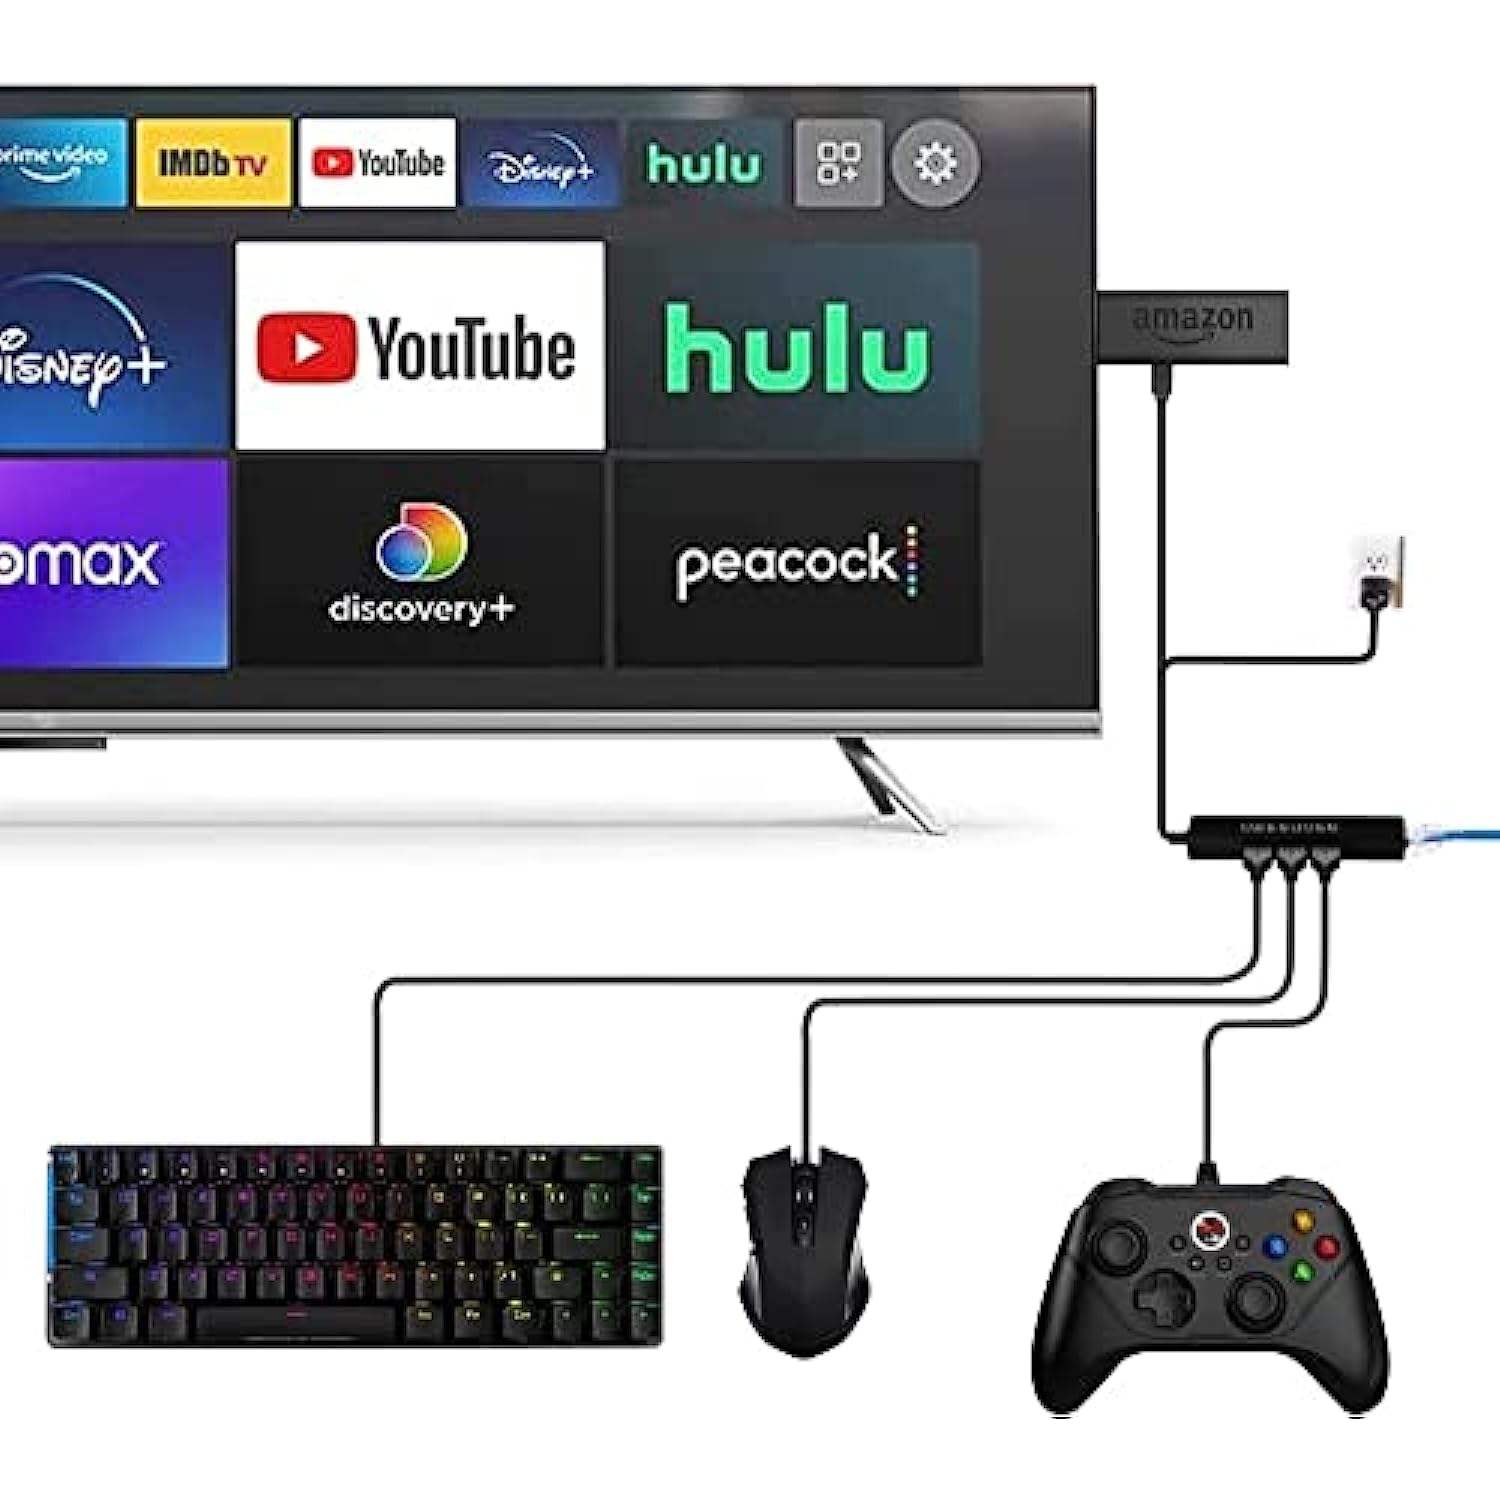 4 in 1 Ethernet Adapter and 3 Ports USB OTG Hub for Fire TV Stick 4K/Chromecast/Google Home Mini/Raspberry Pi Zero and Other Streaming TV Sticks